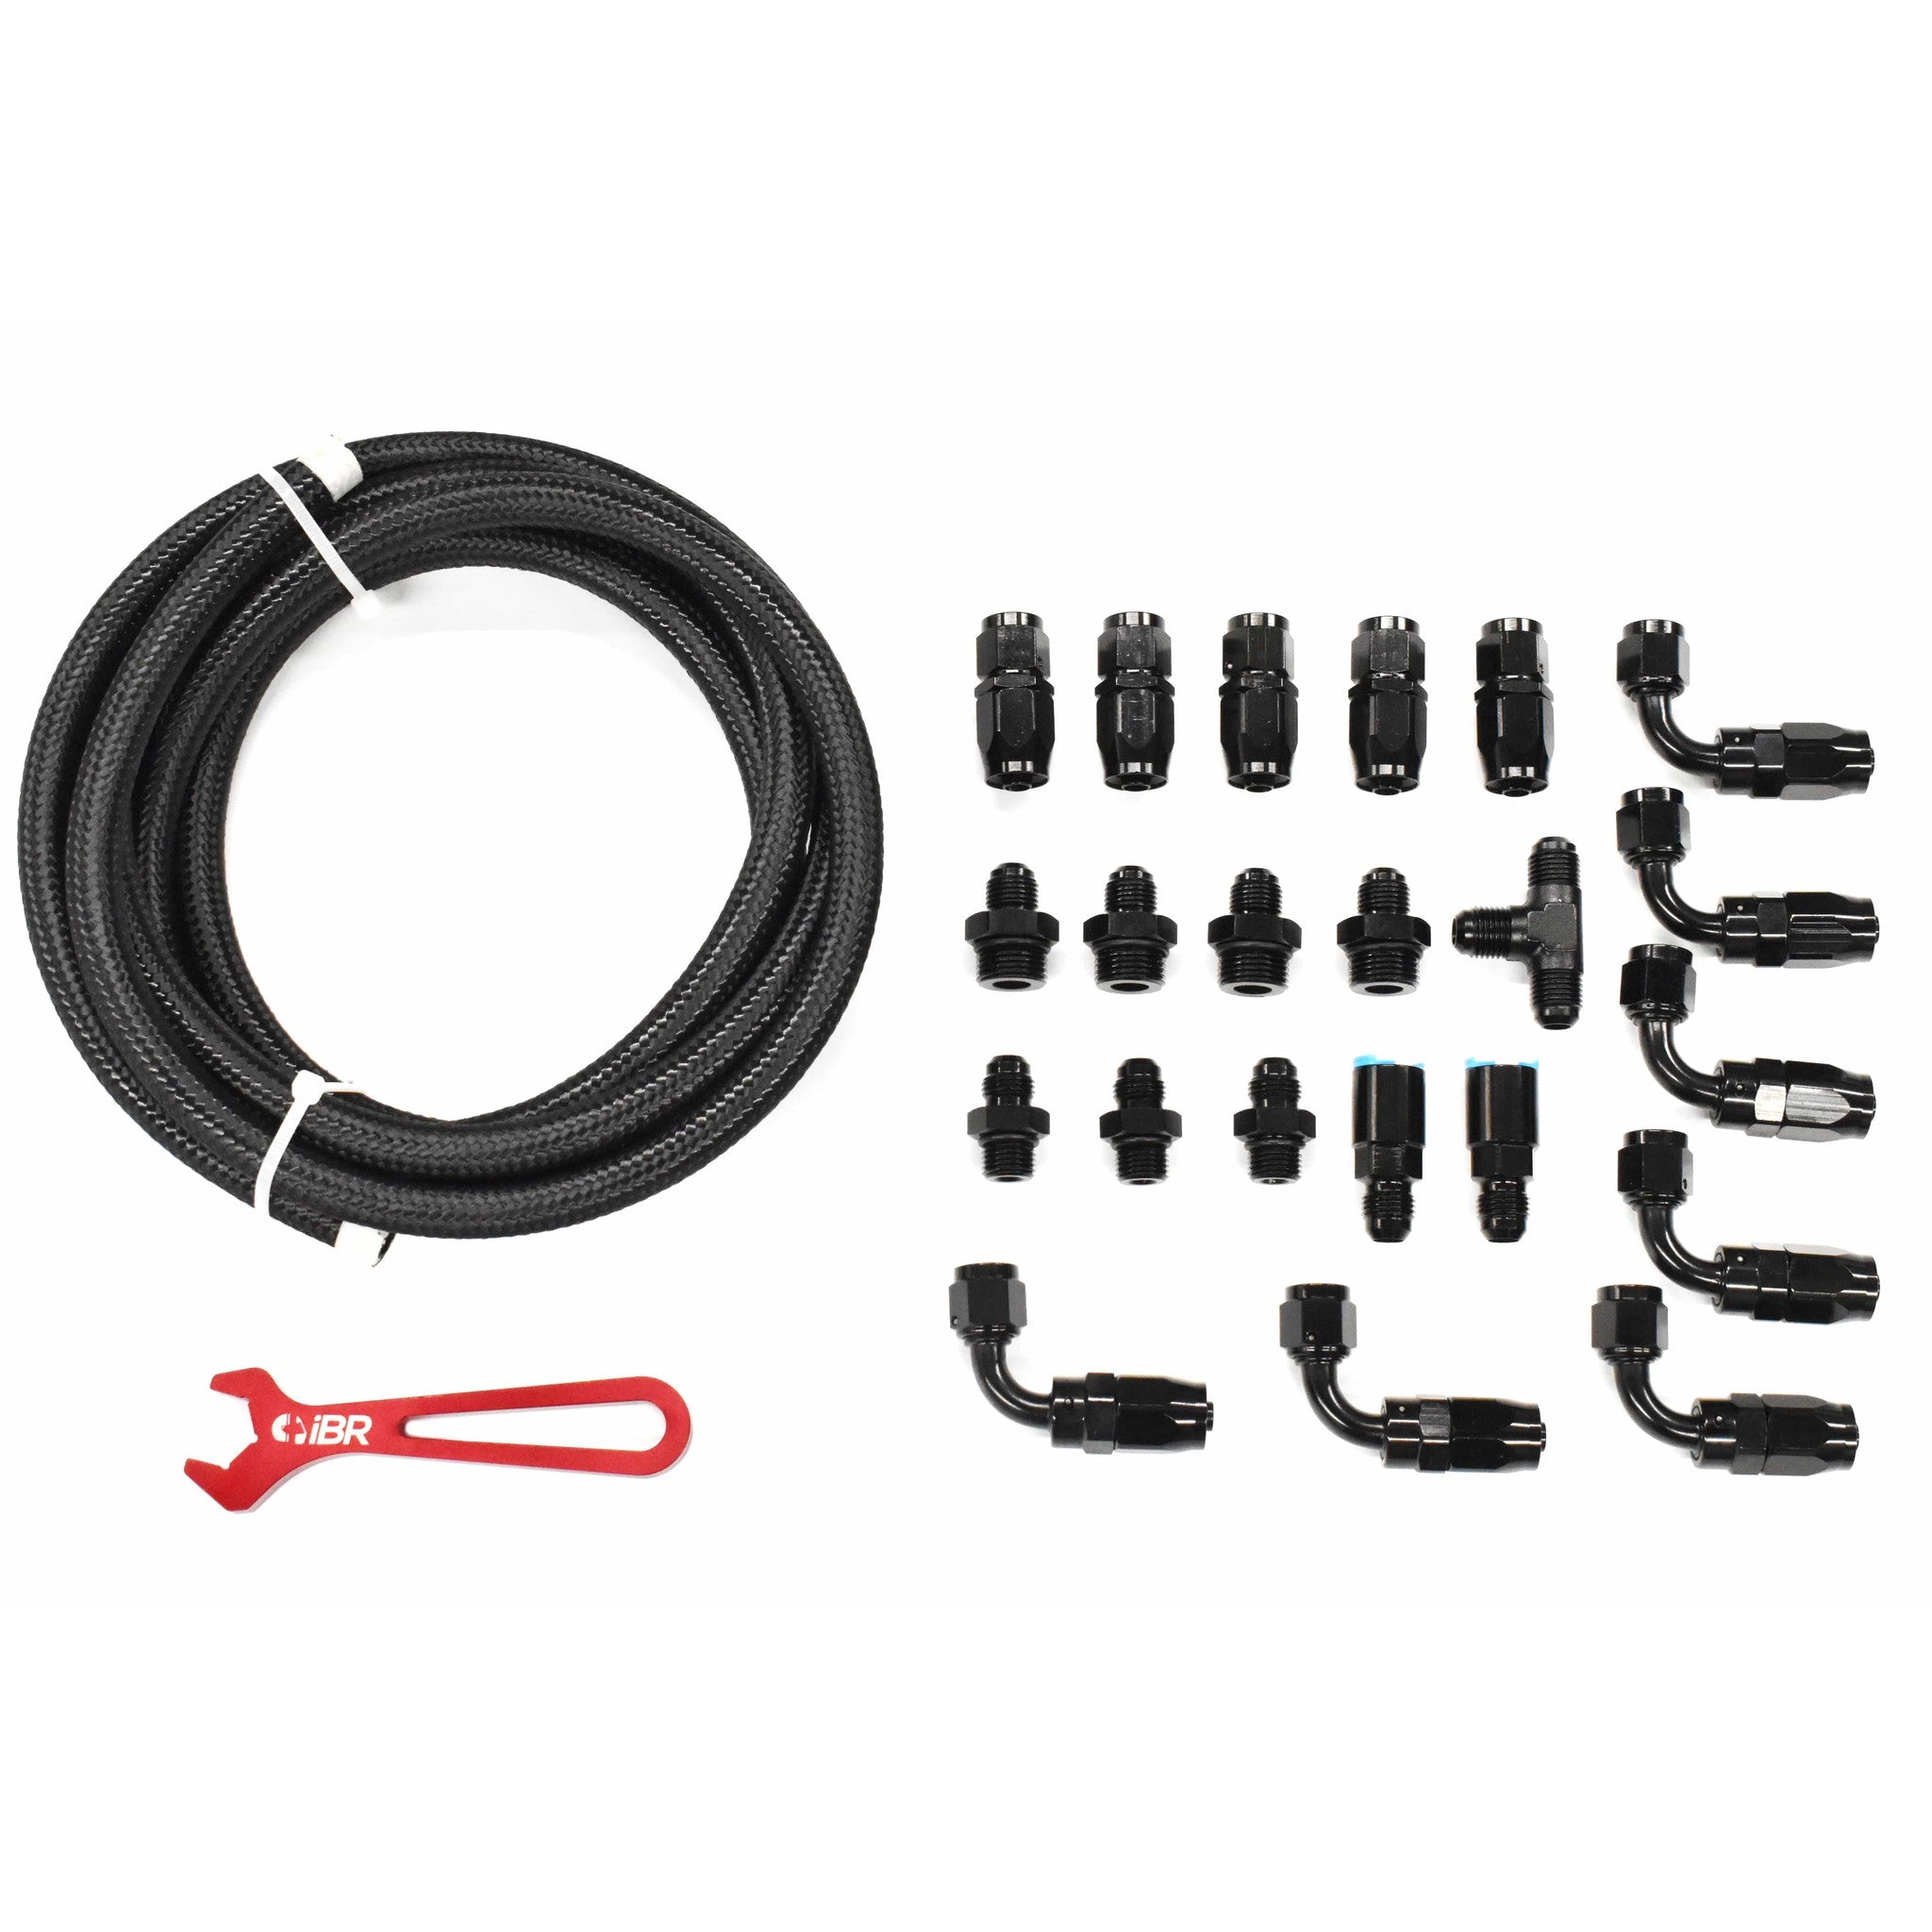 IAG Braided Fuel Line & Fitting Kit for IAG Top Feed Fuel Rails & OEM FPR